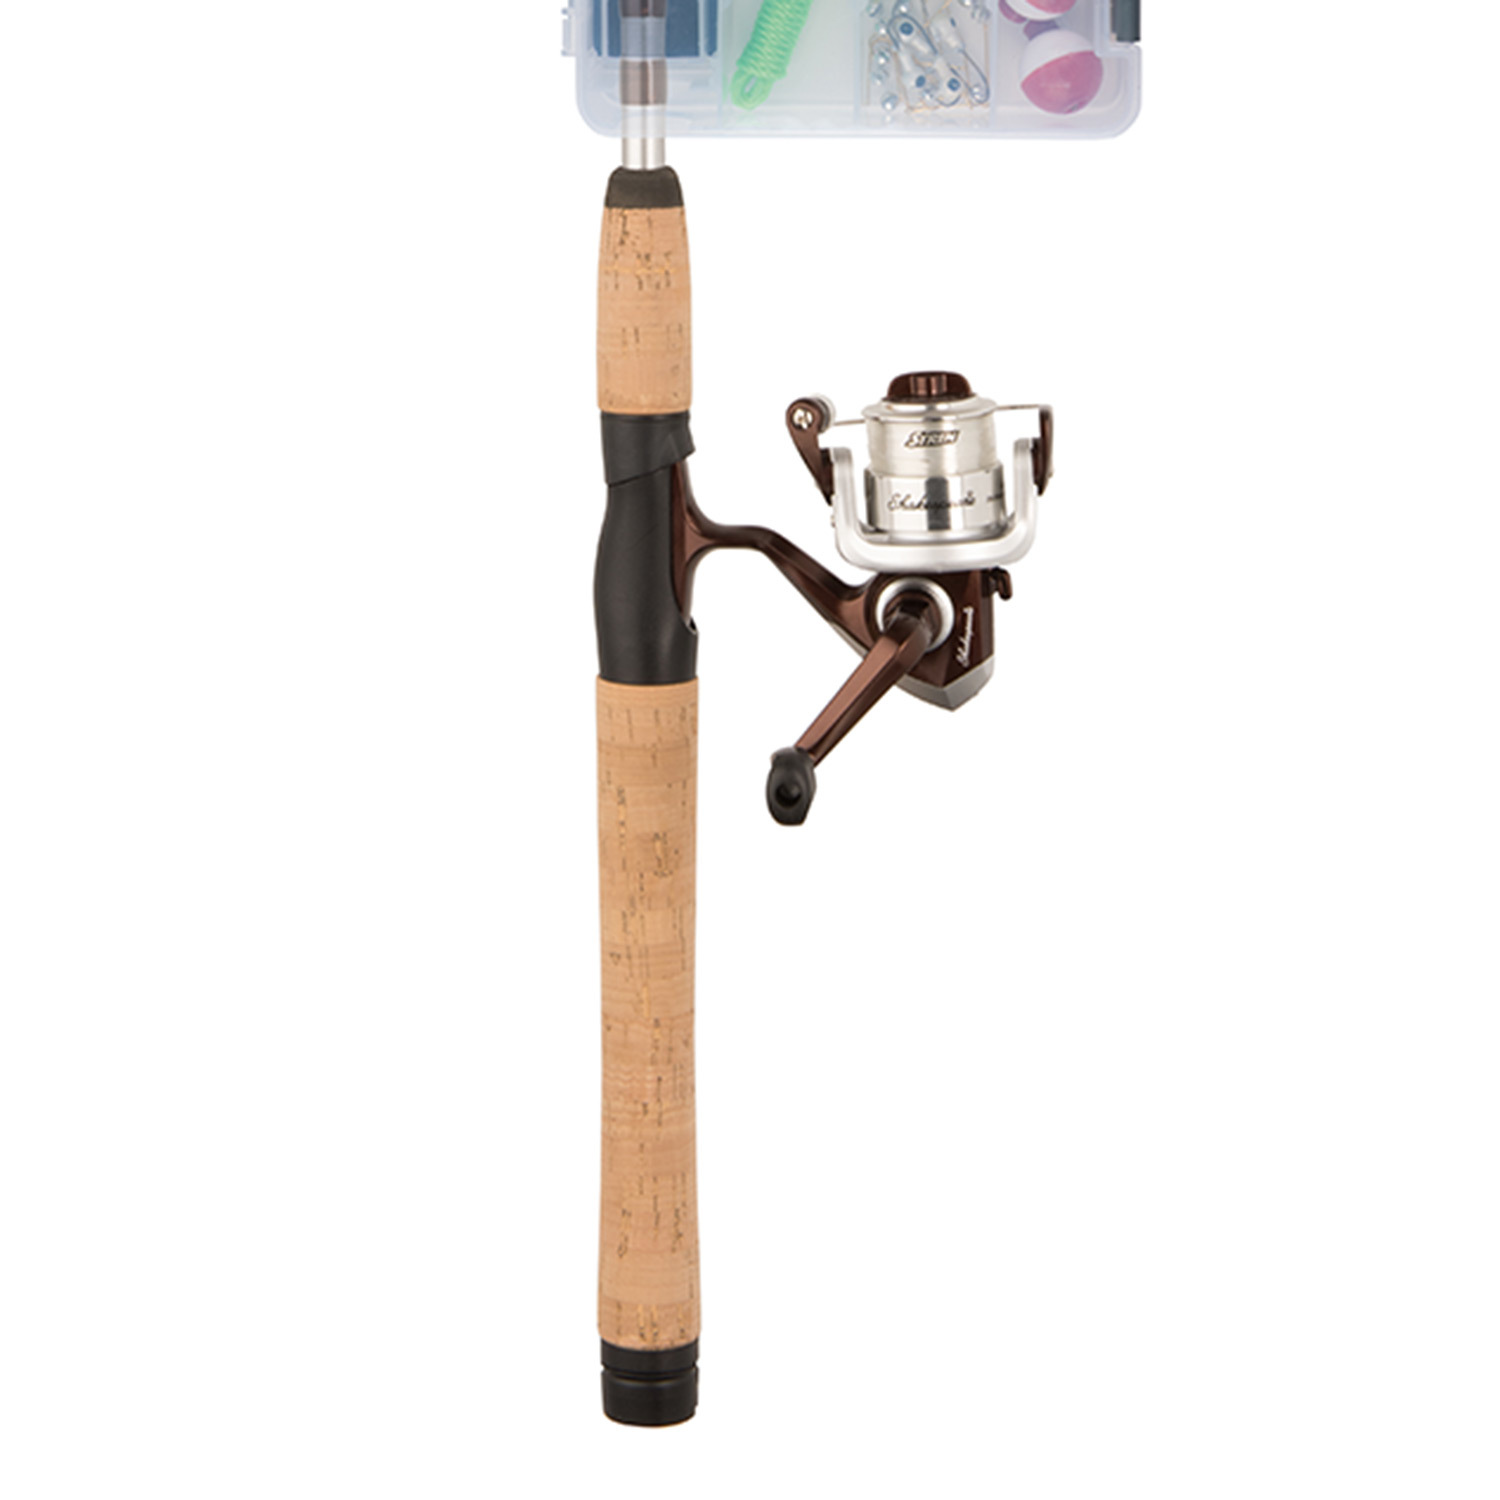 7' Catch More Fish™ Crappie Spinning Combo Kit